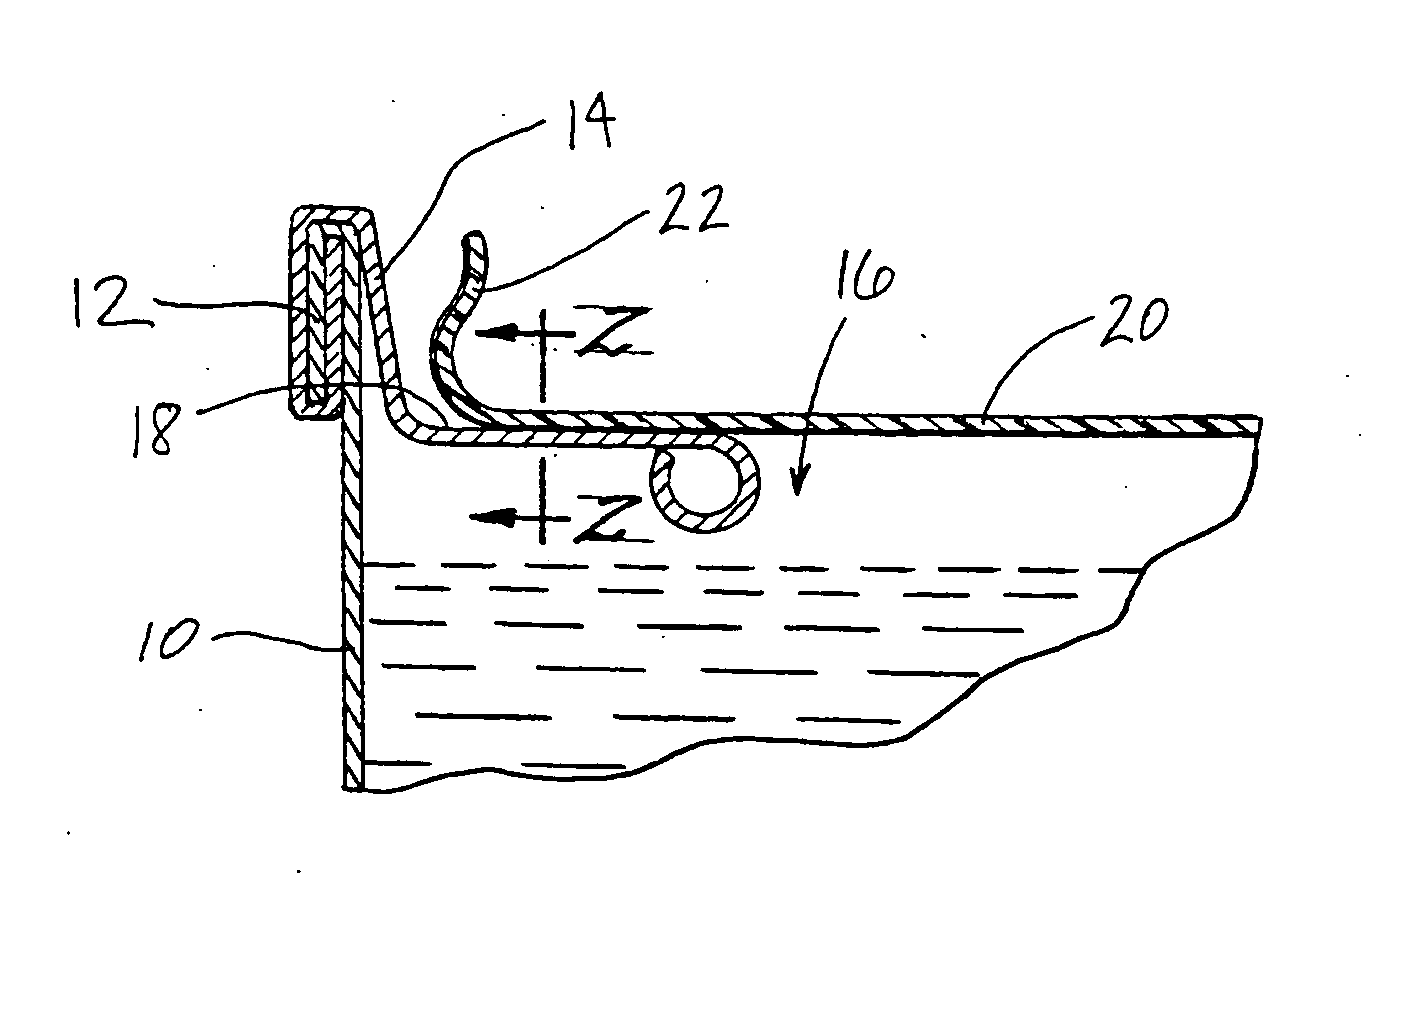 Easily openable closure for a retortable container having a metal end to which a membrane is sealed